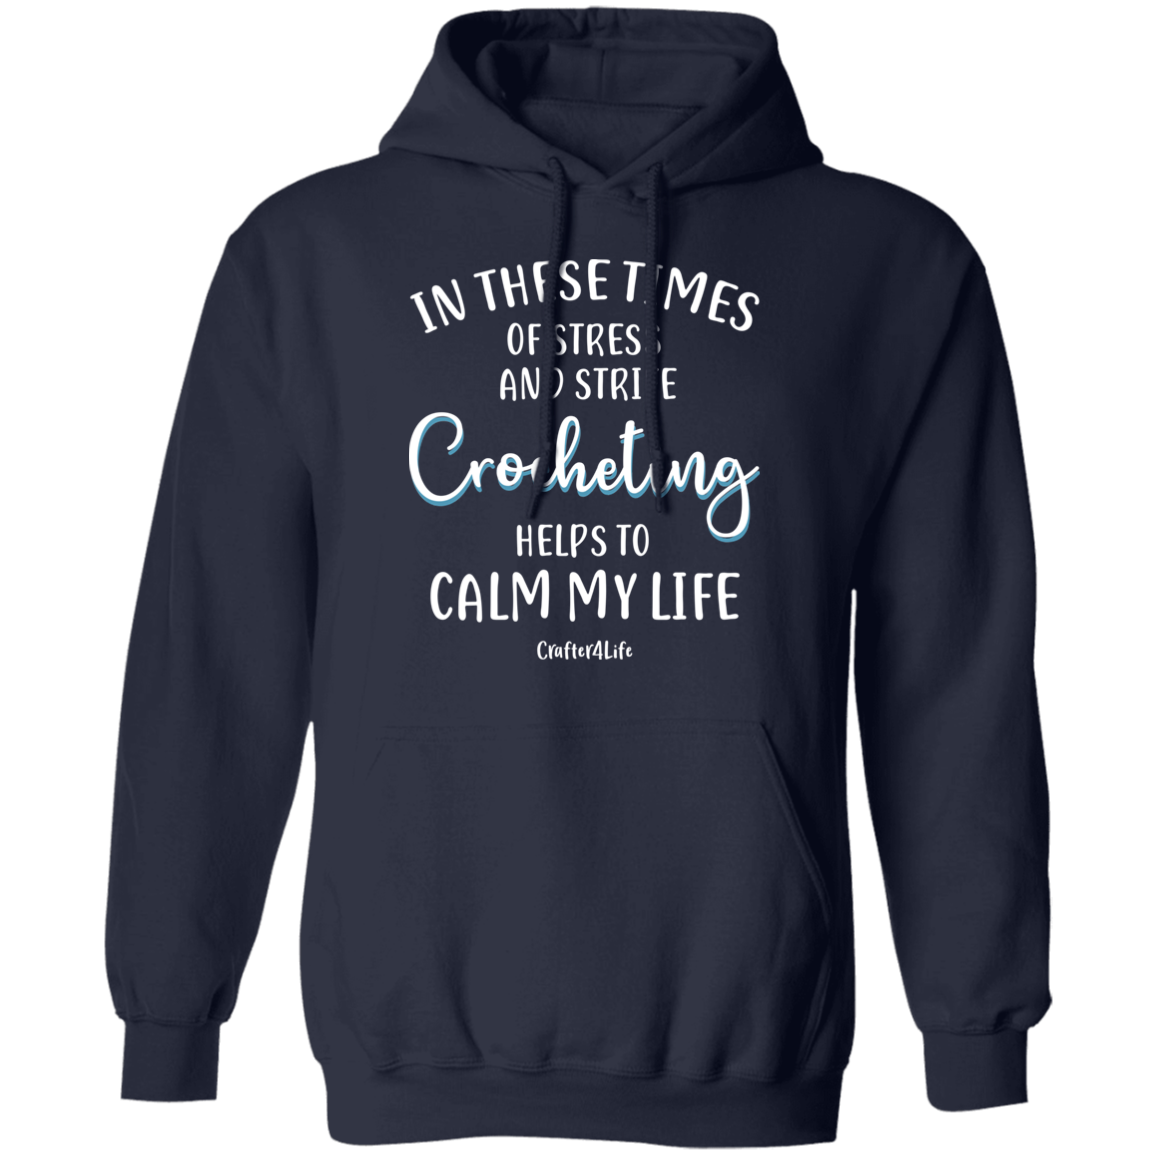 Crocheting Helps to Calm My Life Pullover Hoodie